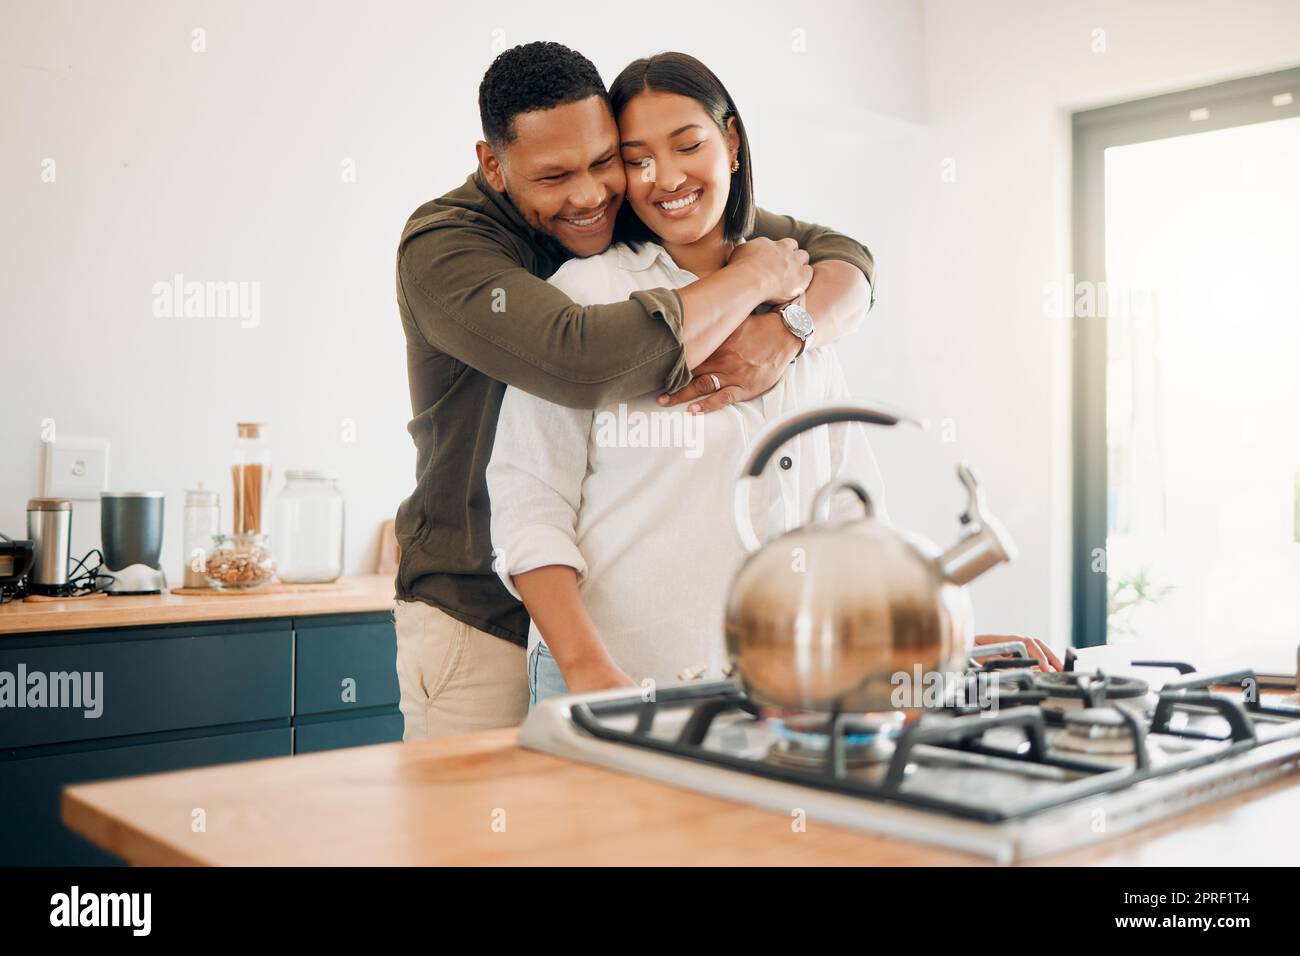 Romantic, love and bonding couple hugging while enjoying quality time together at home. Loving husband showing affection, care and embrace to his relaxing wife while making tea in the kitchen Stock Photo